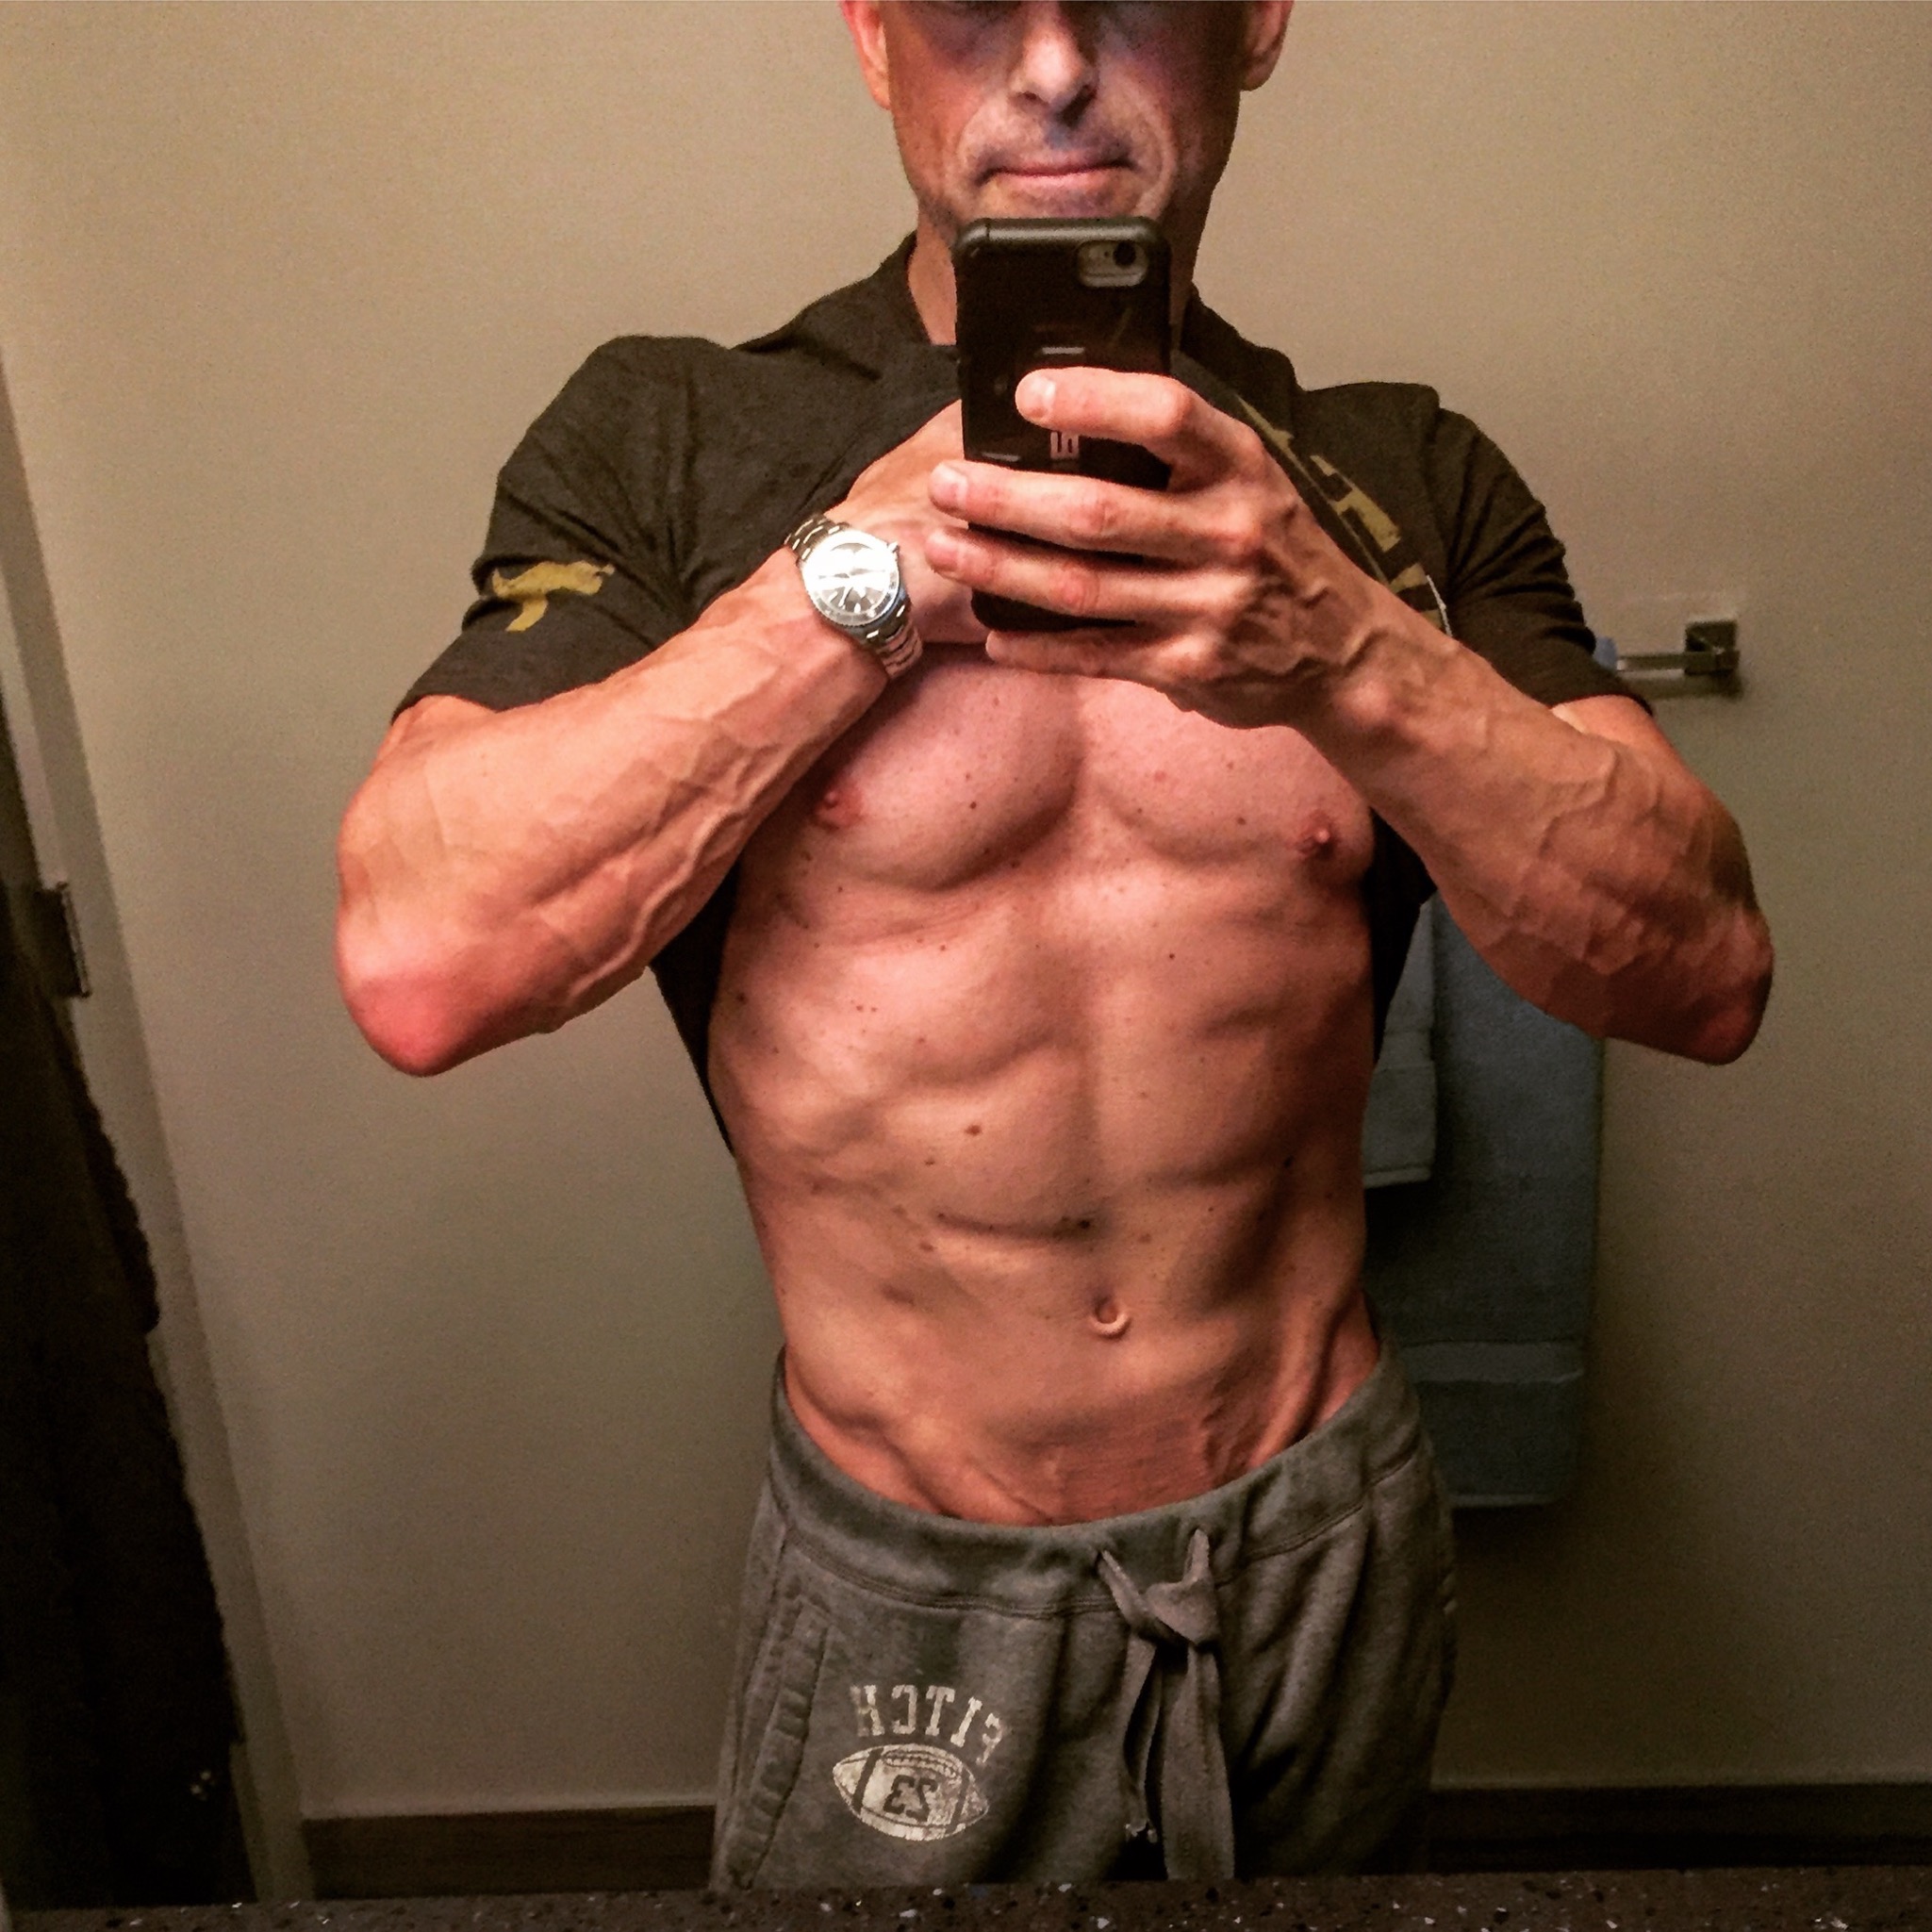 Secrets of Getting Ripped No One Talks About (and Few Understand)